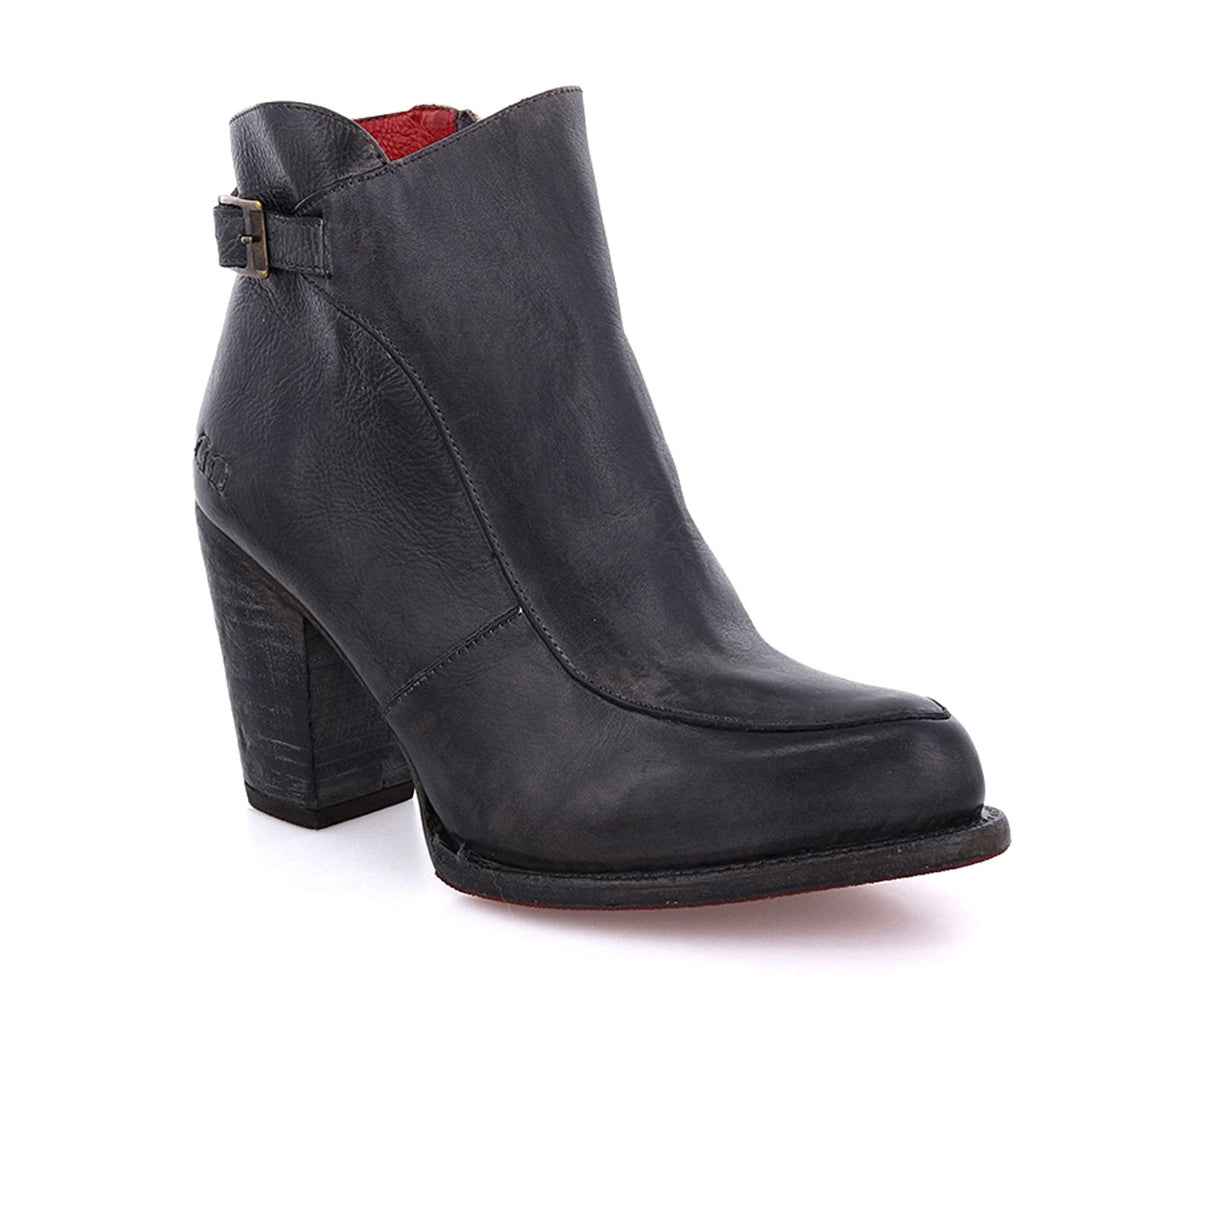 Bed Stu Isla Ankle Boot (Women) - Black Rustic Boots - Casual - Low - The Heel Shoe Fitters